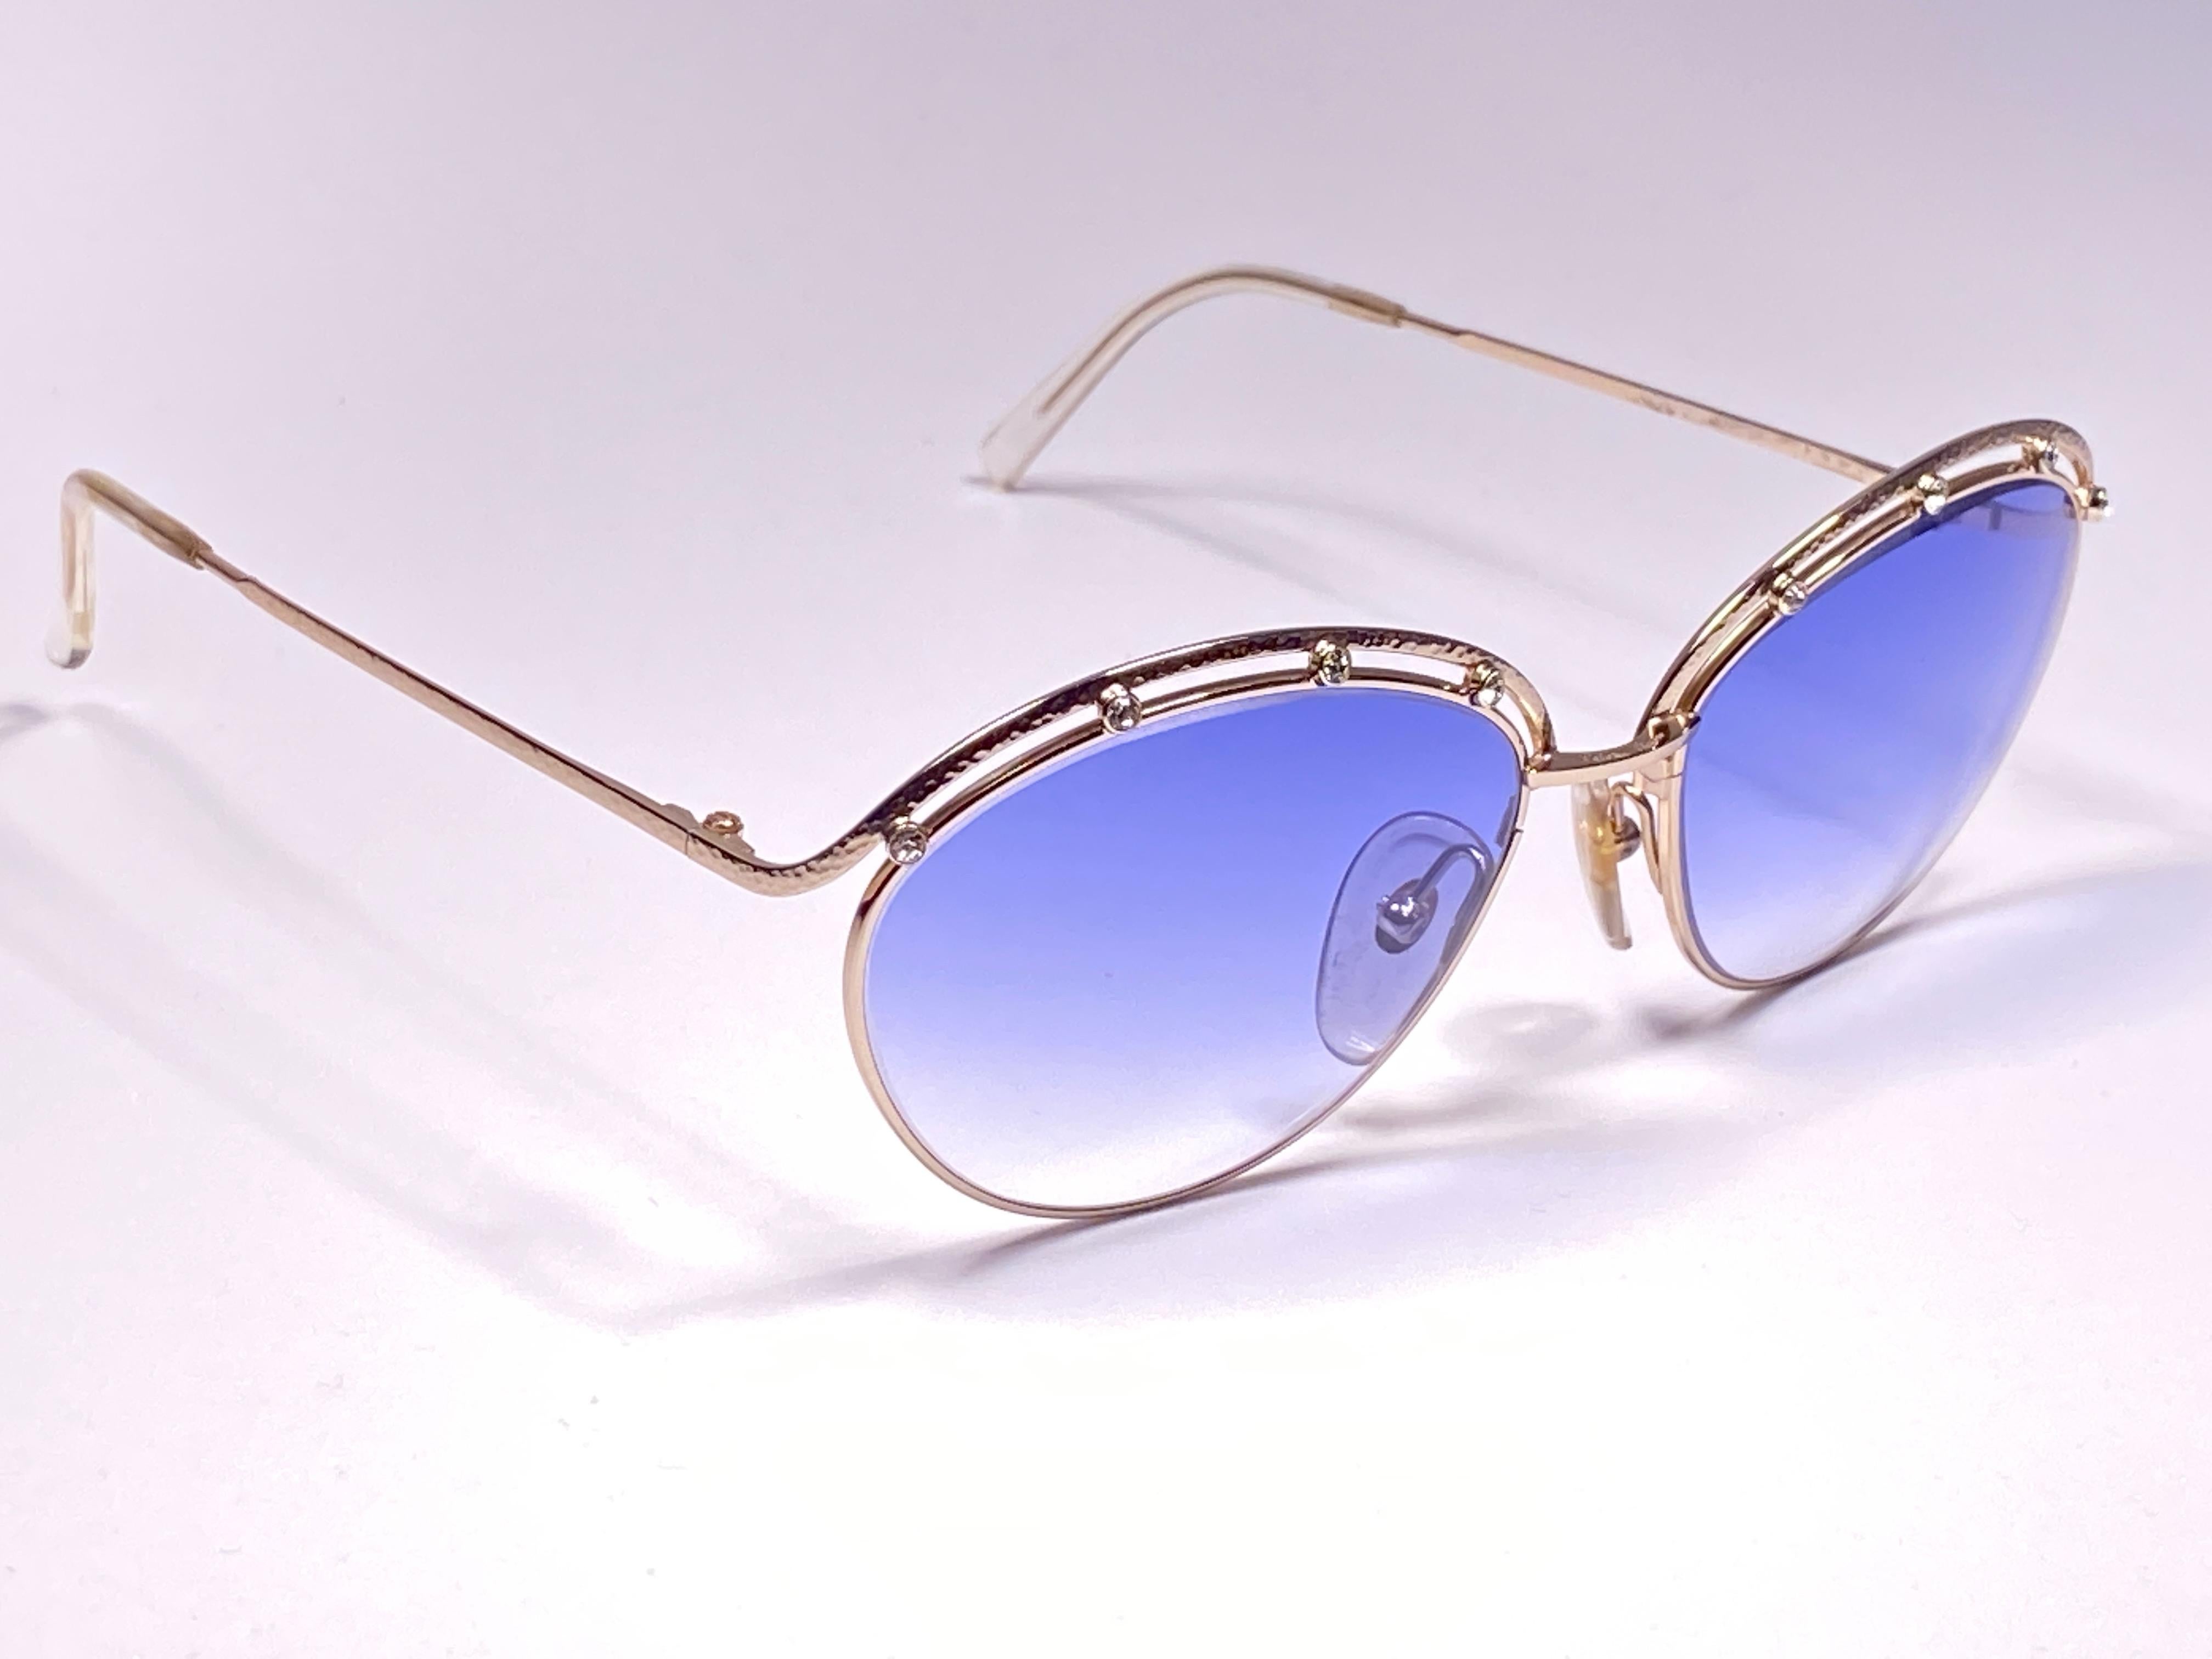 Mint Vintage Paloma Picasso rhinestones detailed silver frame with blue gradient lenses sunglasses . Made in Germany 1980's. 

Frame with minor wear due to storage. 

Made in Germany.

MESUREMENTS:

FRONT : 14.5 CMS
LENS HEIGHT :4.5 CMS
LENS  WIDTH